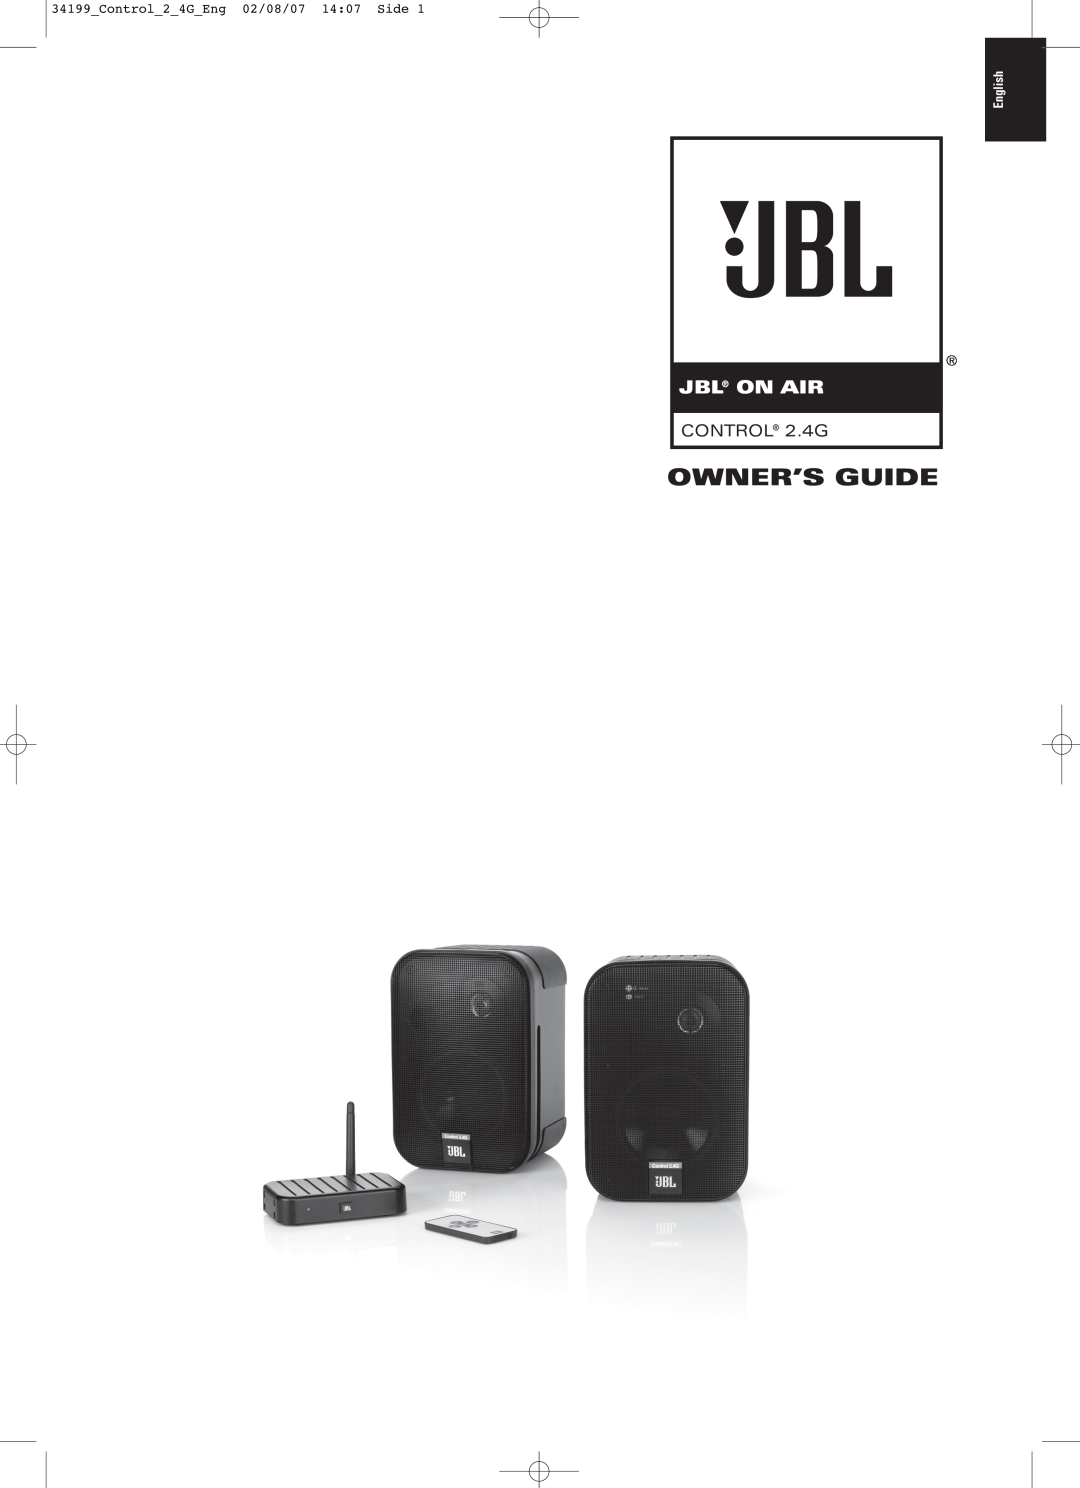 JBL CONTROL 2.4G manual Owner’S Guide, Jbl On Air, Control 2 4G Eng 02/08/07 14 07 Side, English 